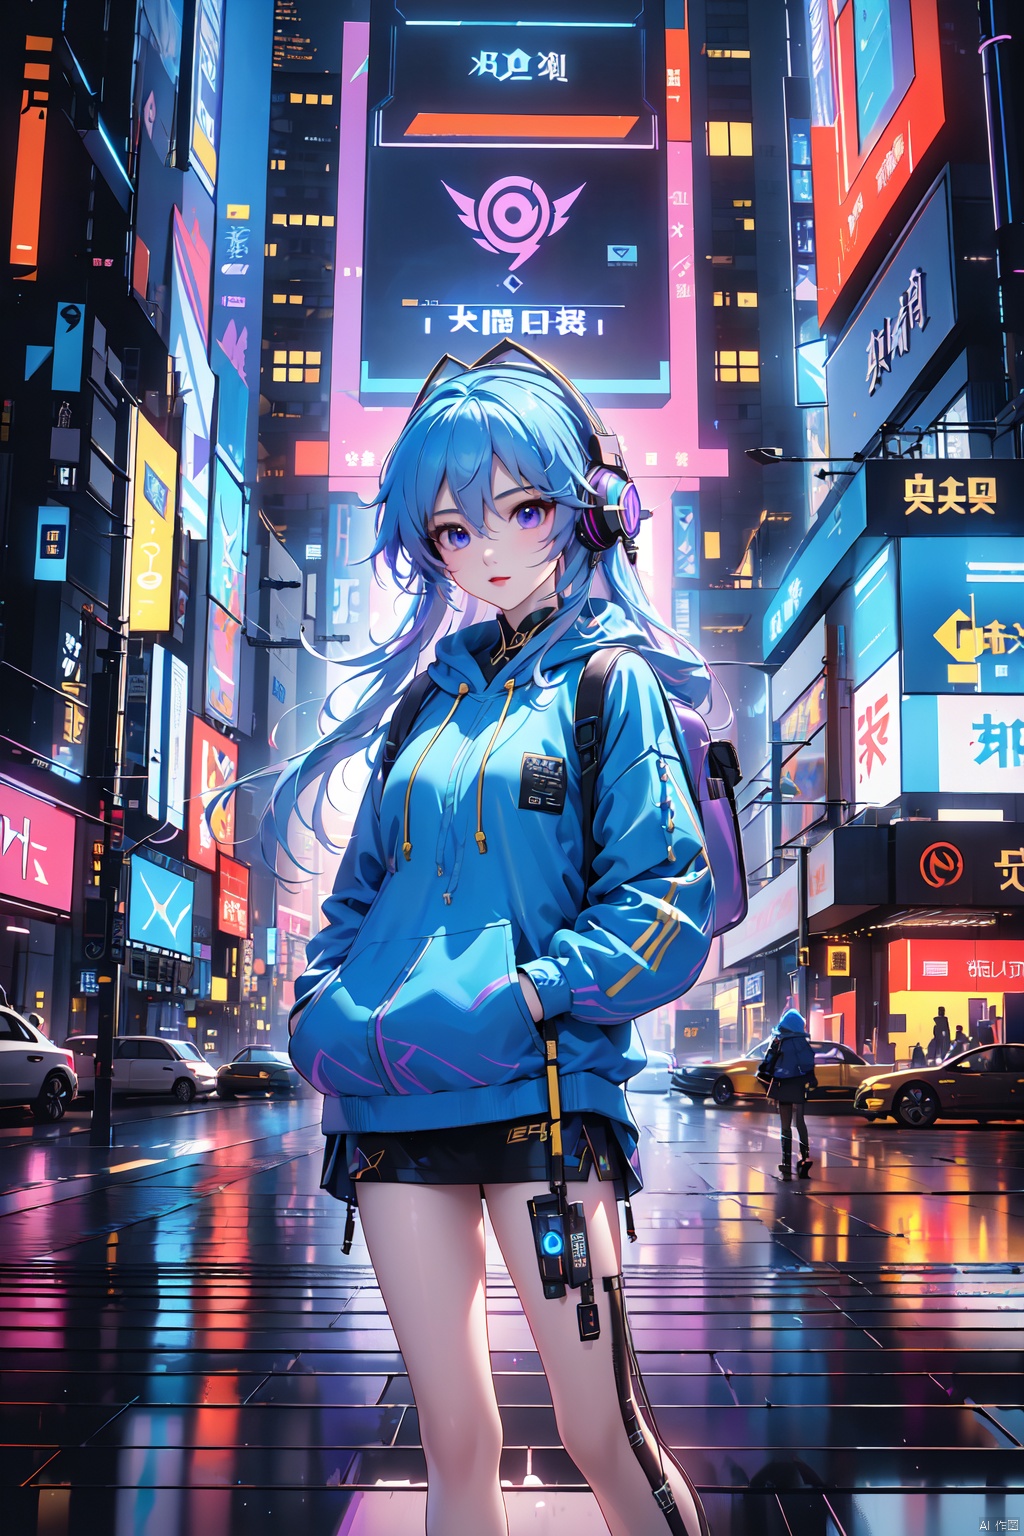  Dreampolis, hyper-detailed digital illustration, cyberpunk, single girl with techsuite hoodie and headphones in the street, neon lights, lighting bar,(blue|gold|Gradient hair),purple eyes,city, cyberpunk city, film still, backpack, in megapolis, pro-lighting, high-res, masterpiece, (/qingning/), (\MBTI\), (\shen ming shao nv\), Light master,standing